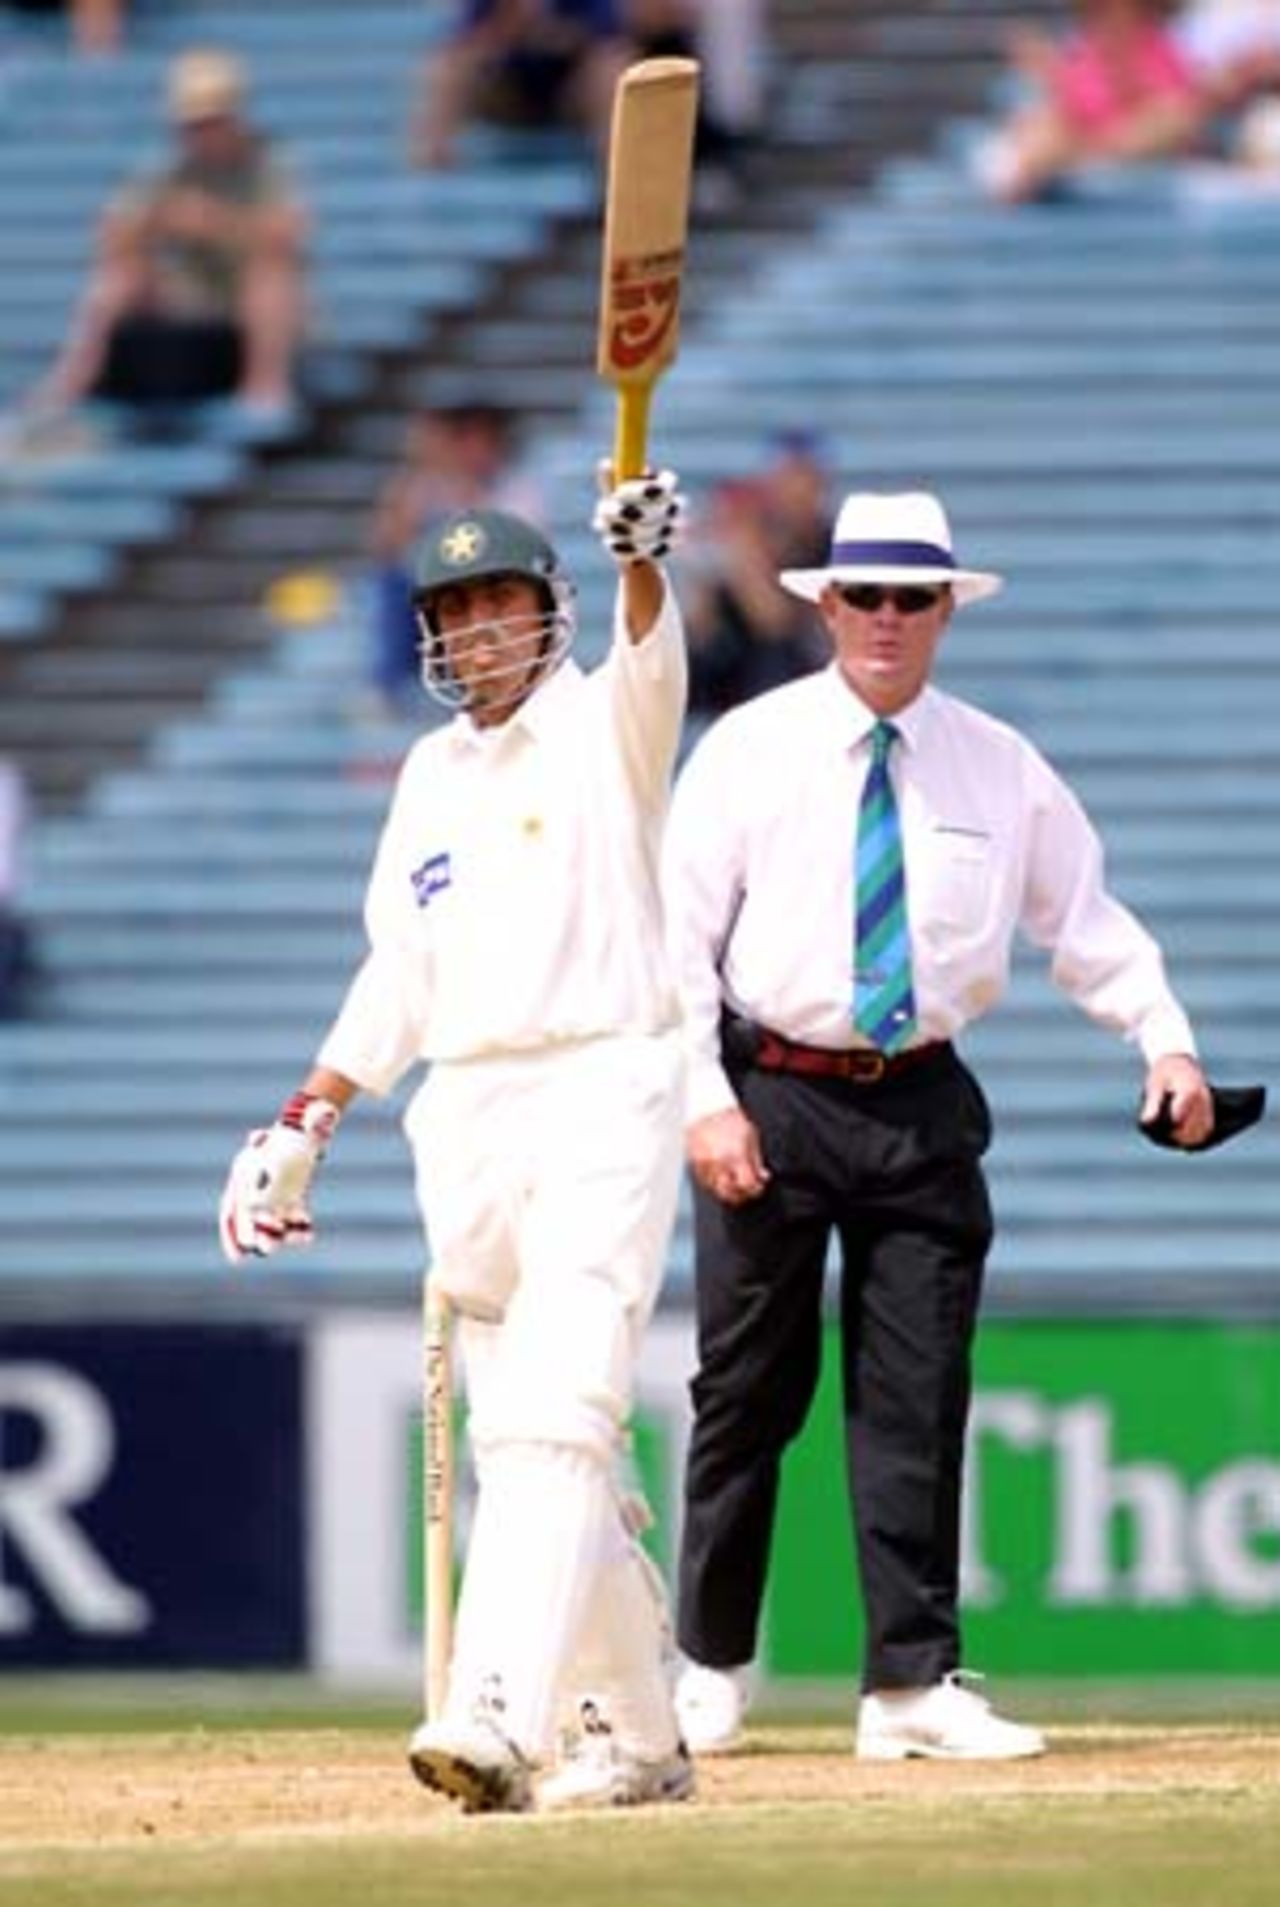 Pakistan batsman Younis Khan raises his bat in celebration of reaching 100 in his second innings, while umpire Russell Tiffin looks on. Younis went on to score 149 not out, his third Test century in his 10th Test. 1st Test: New Zealand v Pakistan at Eden Park, Auckland, 8-12 March 2001 (11 March 2001).